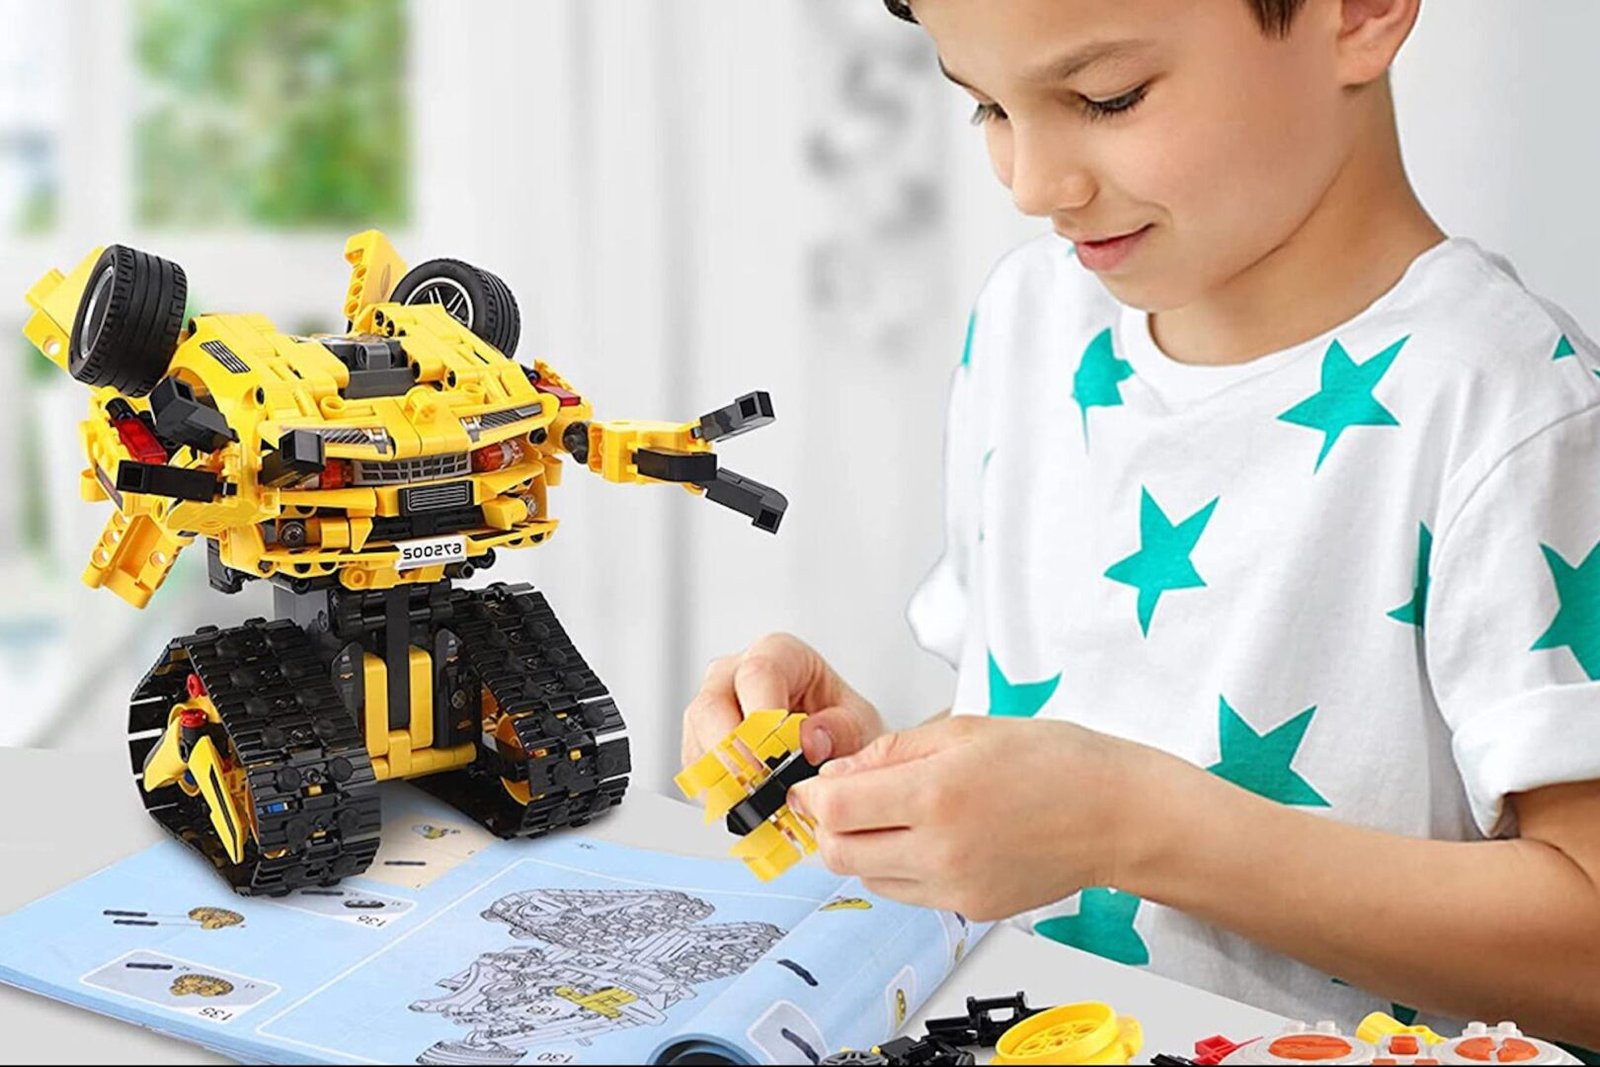 Tap into Your Inner Kid with This Robot Building Kit